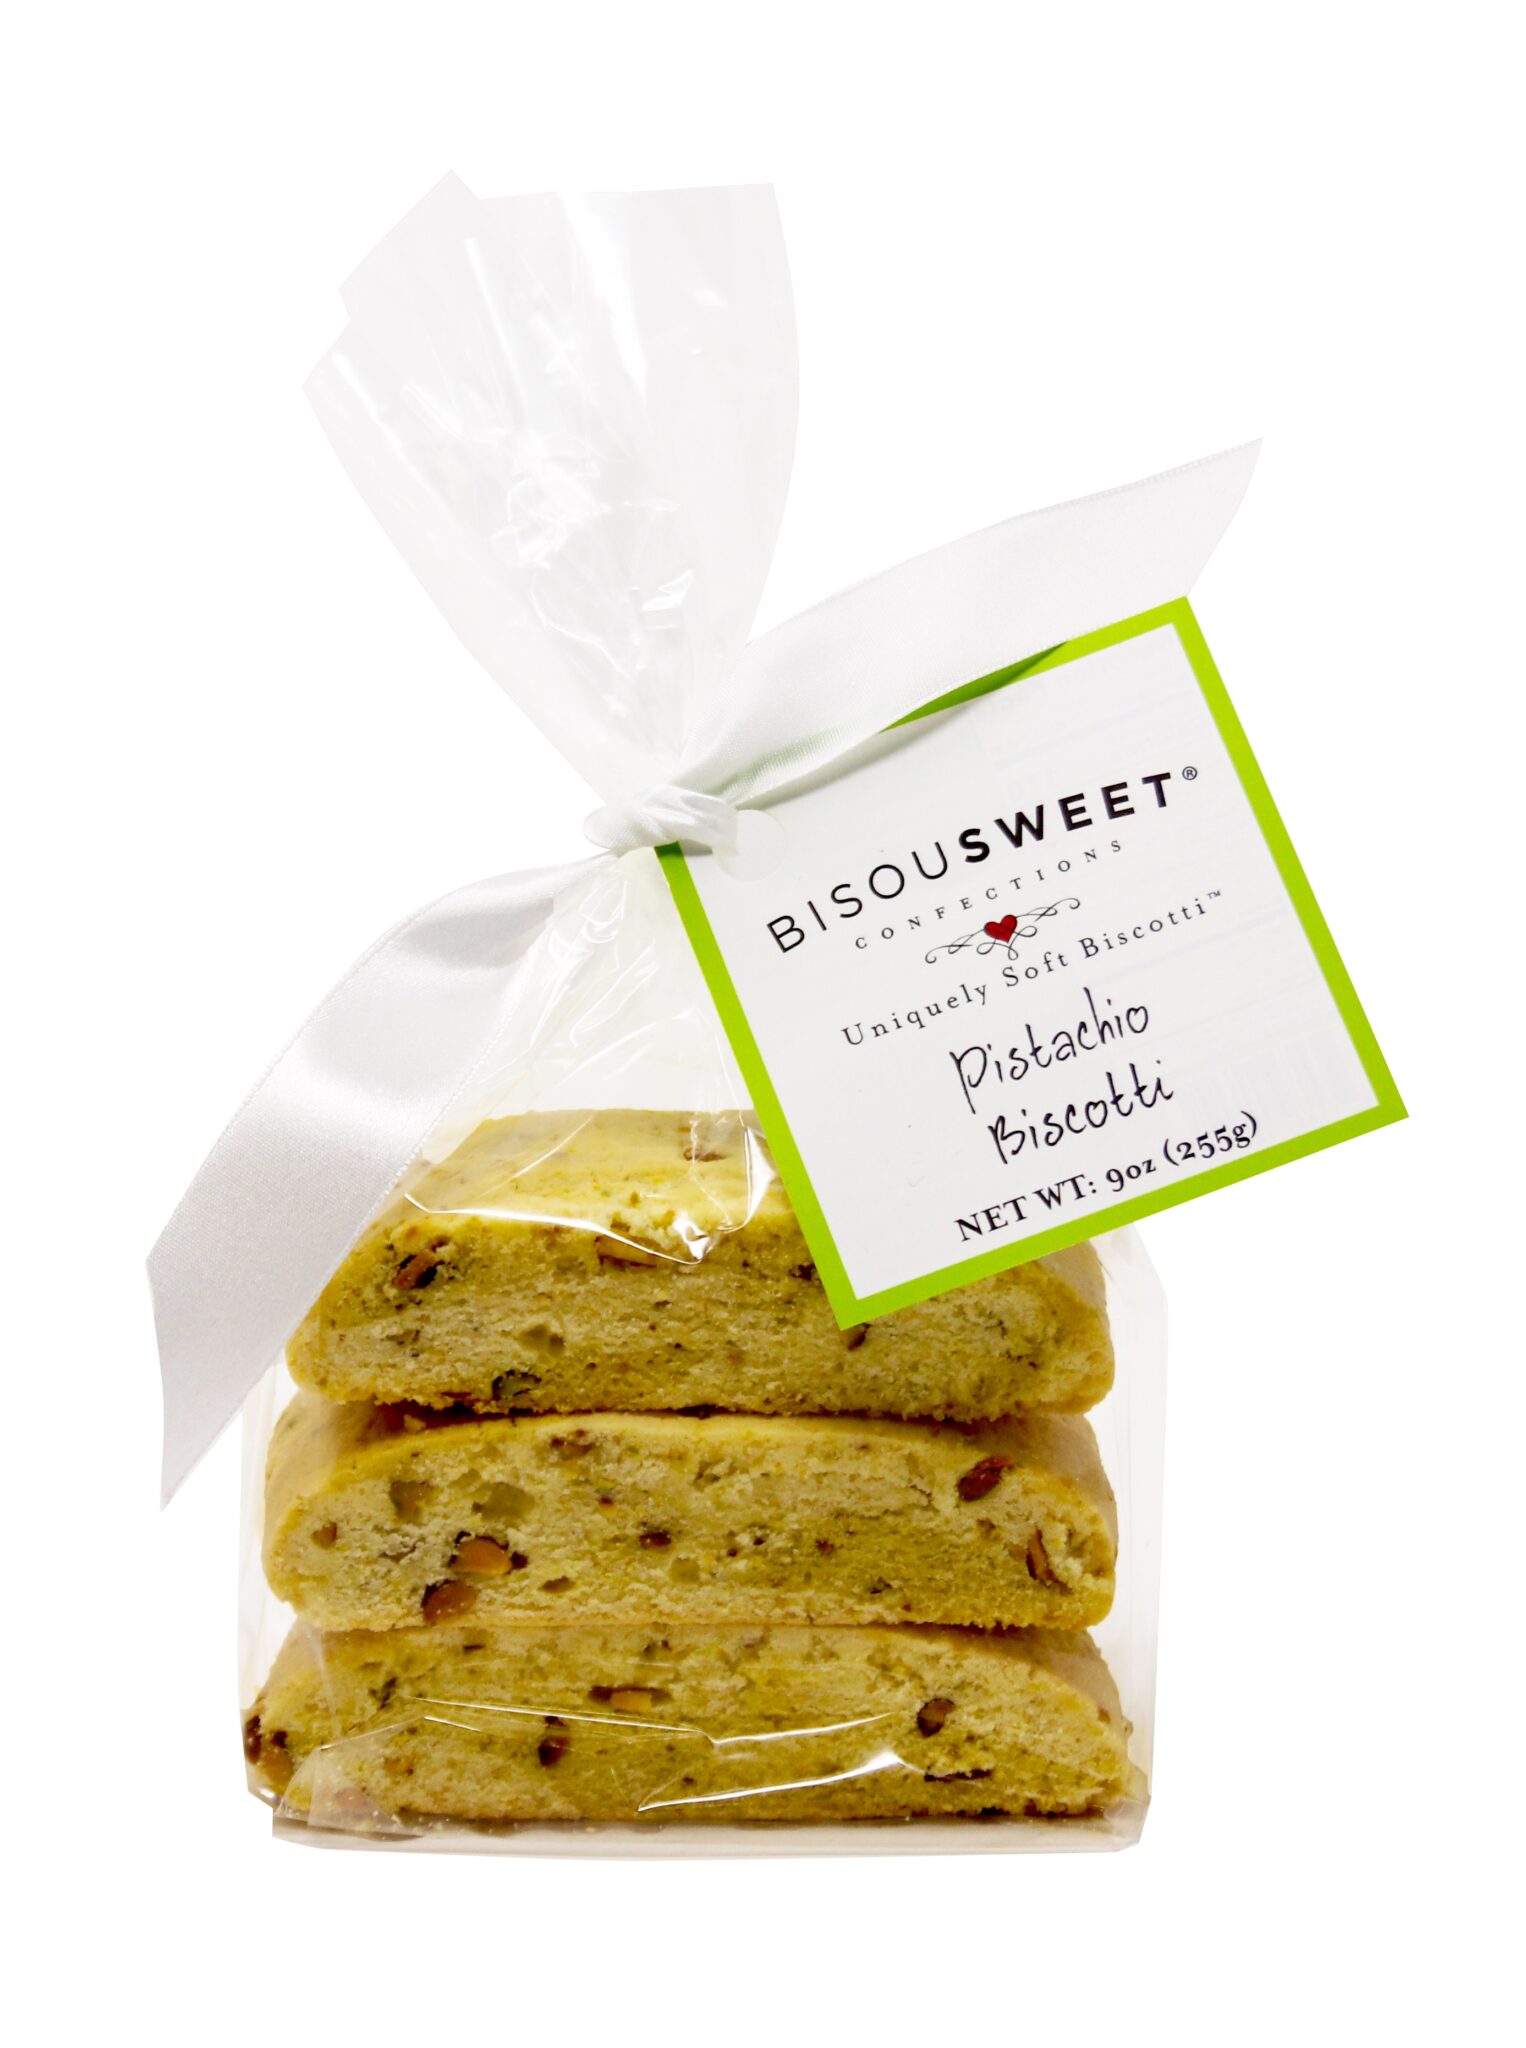 Pistachio Biscotti - Bisousweet Confections